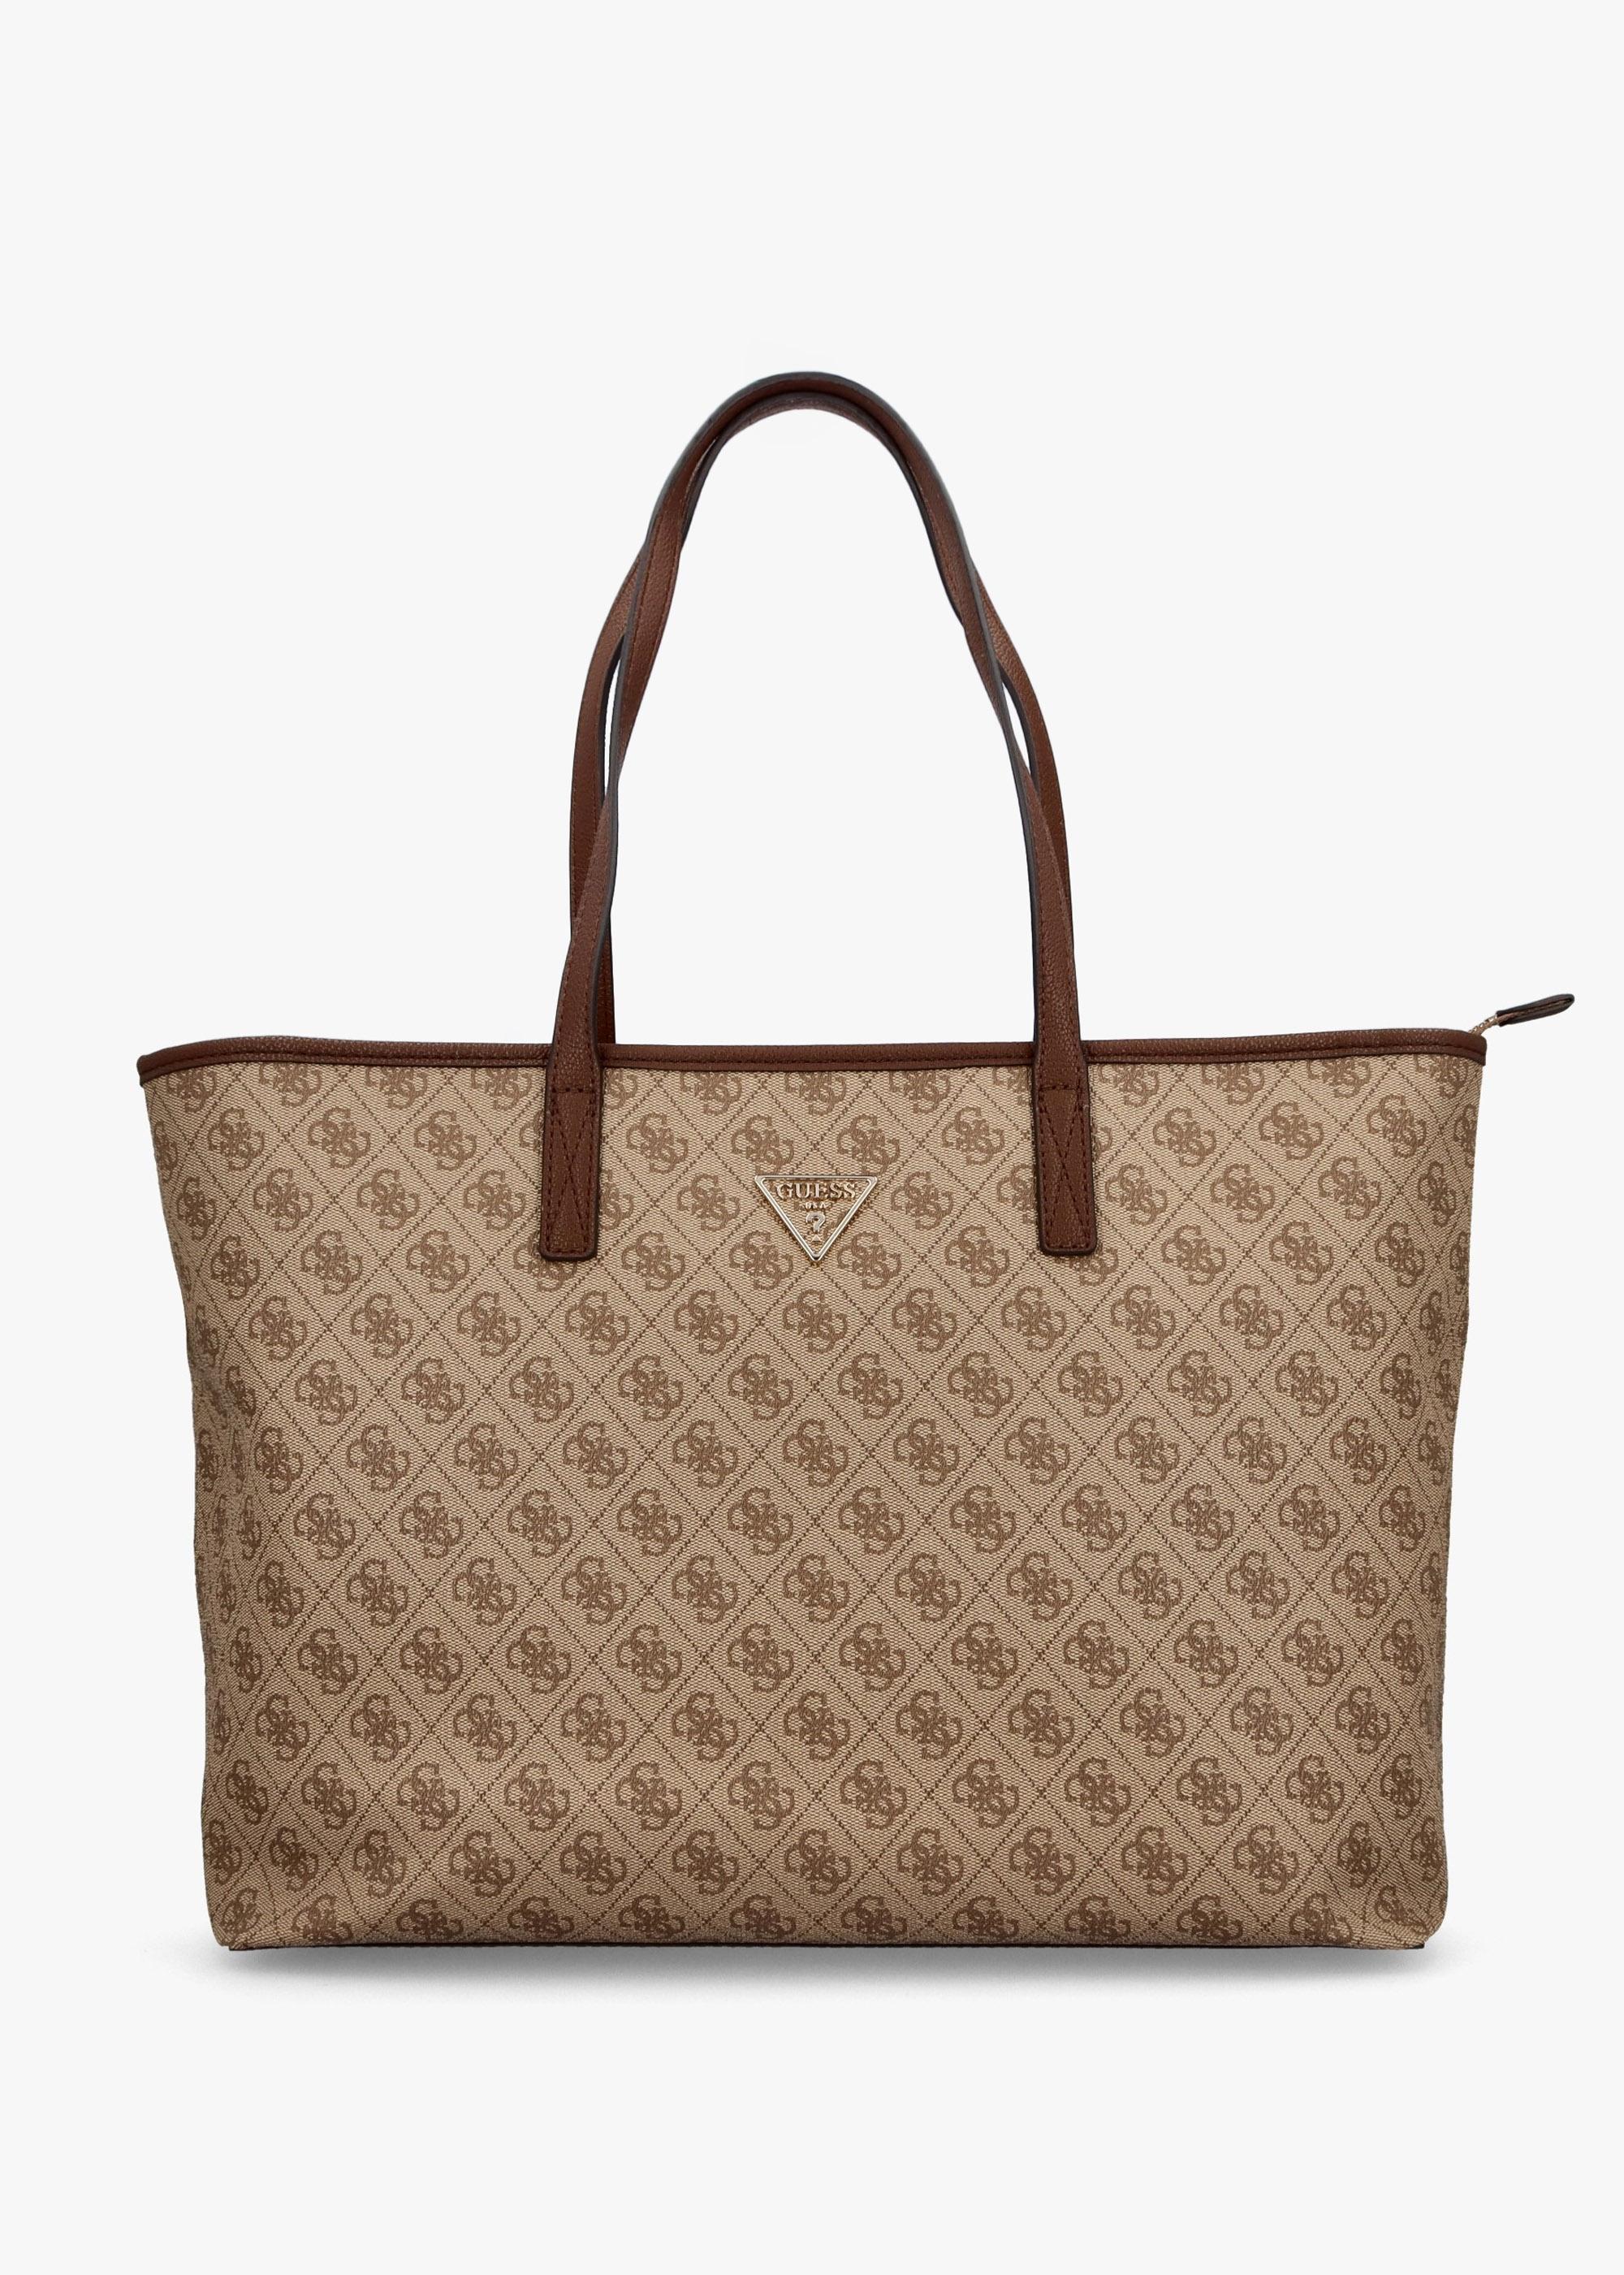 GUESS Vikky Tote Set : GUESS: Clothing, Shoes & Jewelry - Amazon.com